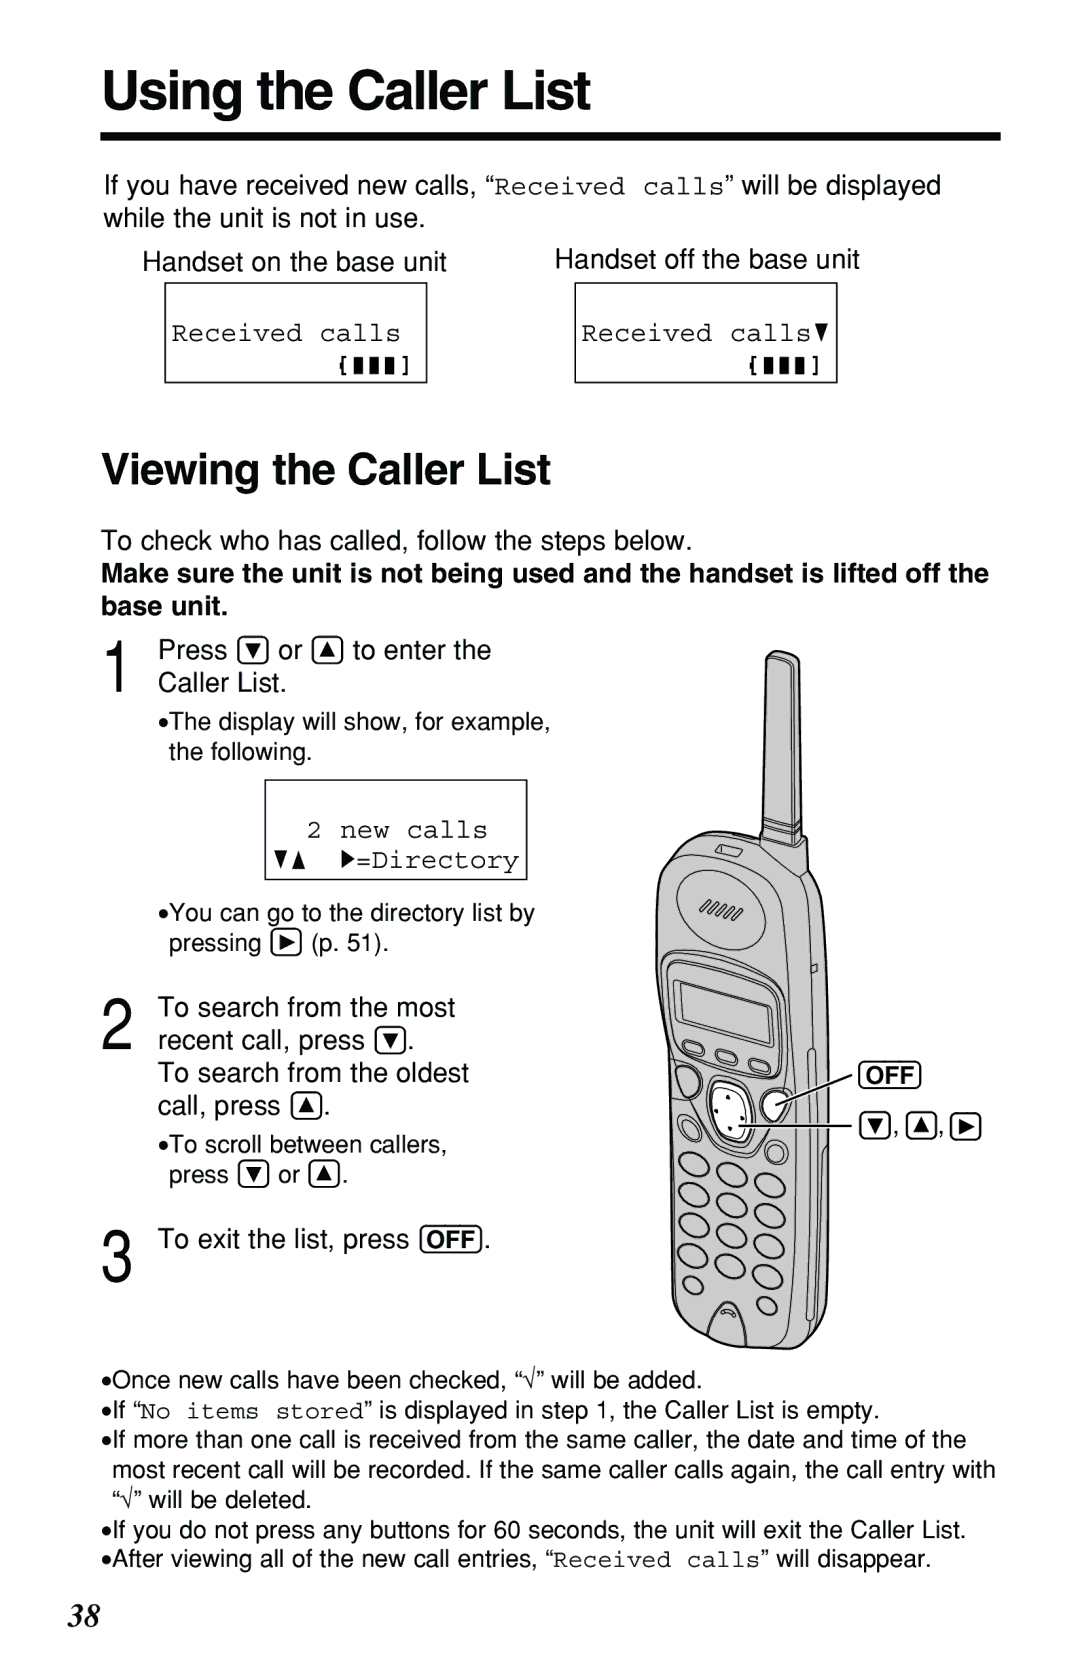 Panasonic KX-TG2257PW, KX-TG2257S operating instructions Using the Caller List, Viewing the Caller List 